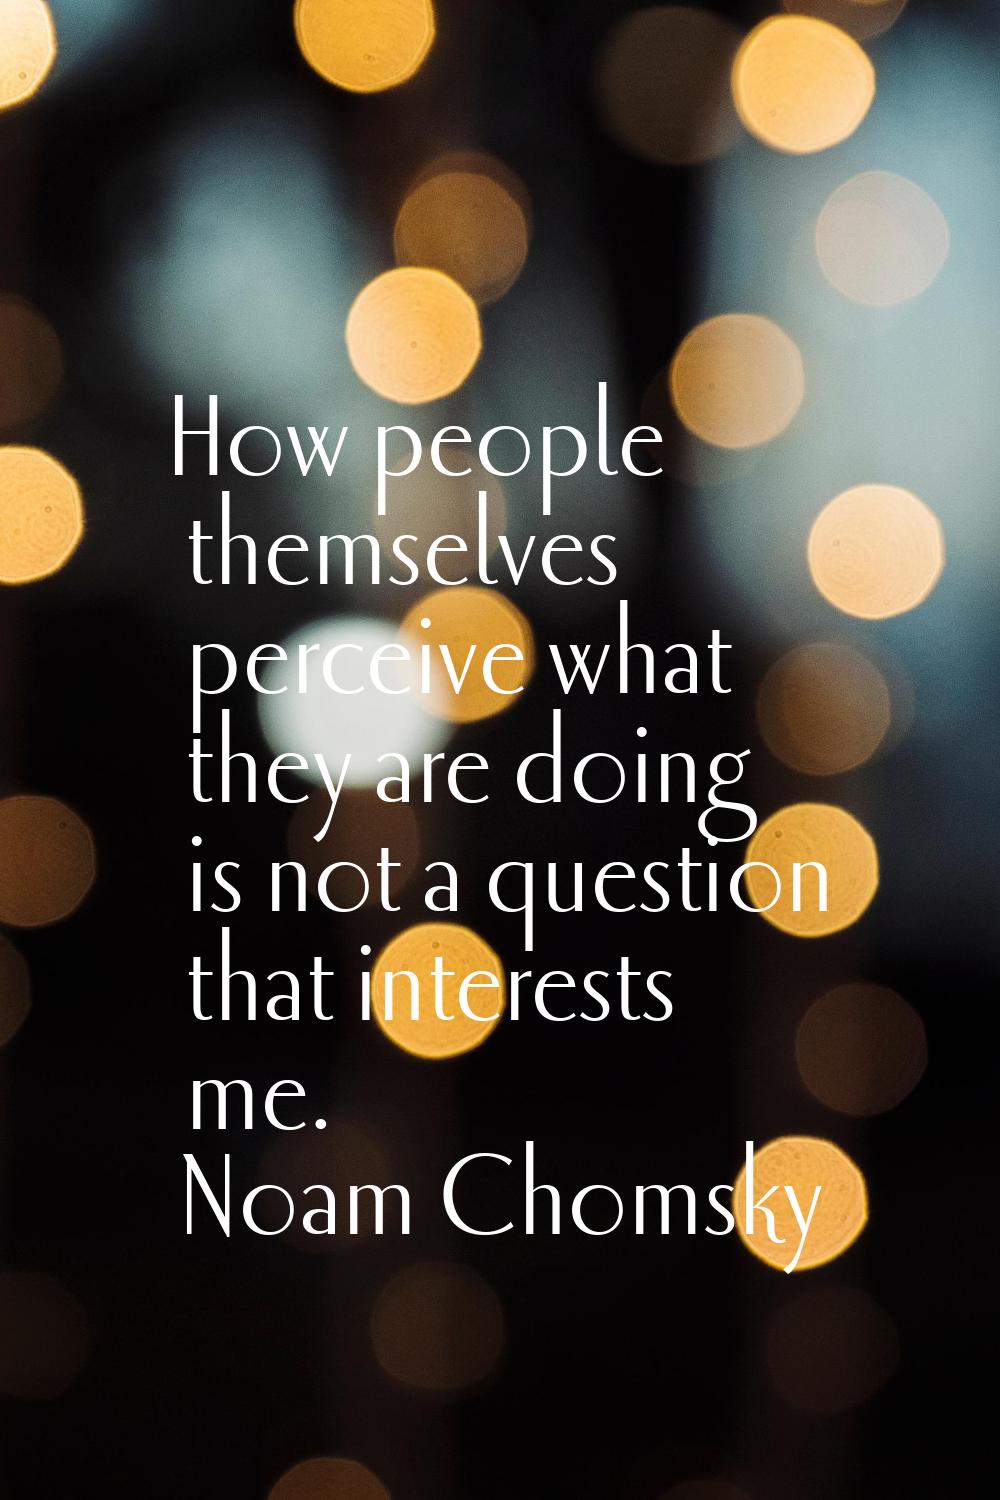 How people themselves perceive what they are doing is not a question that interests me.